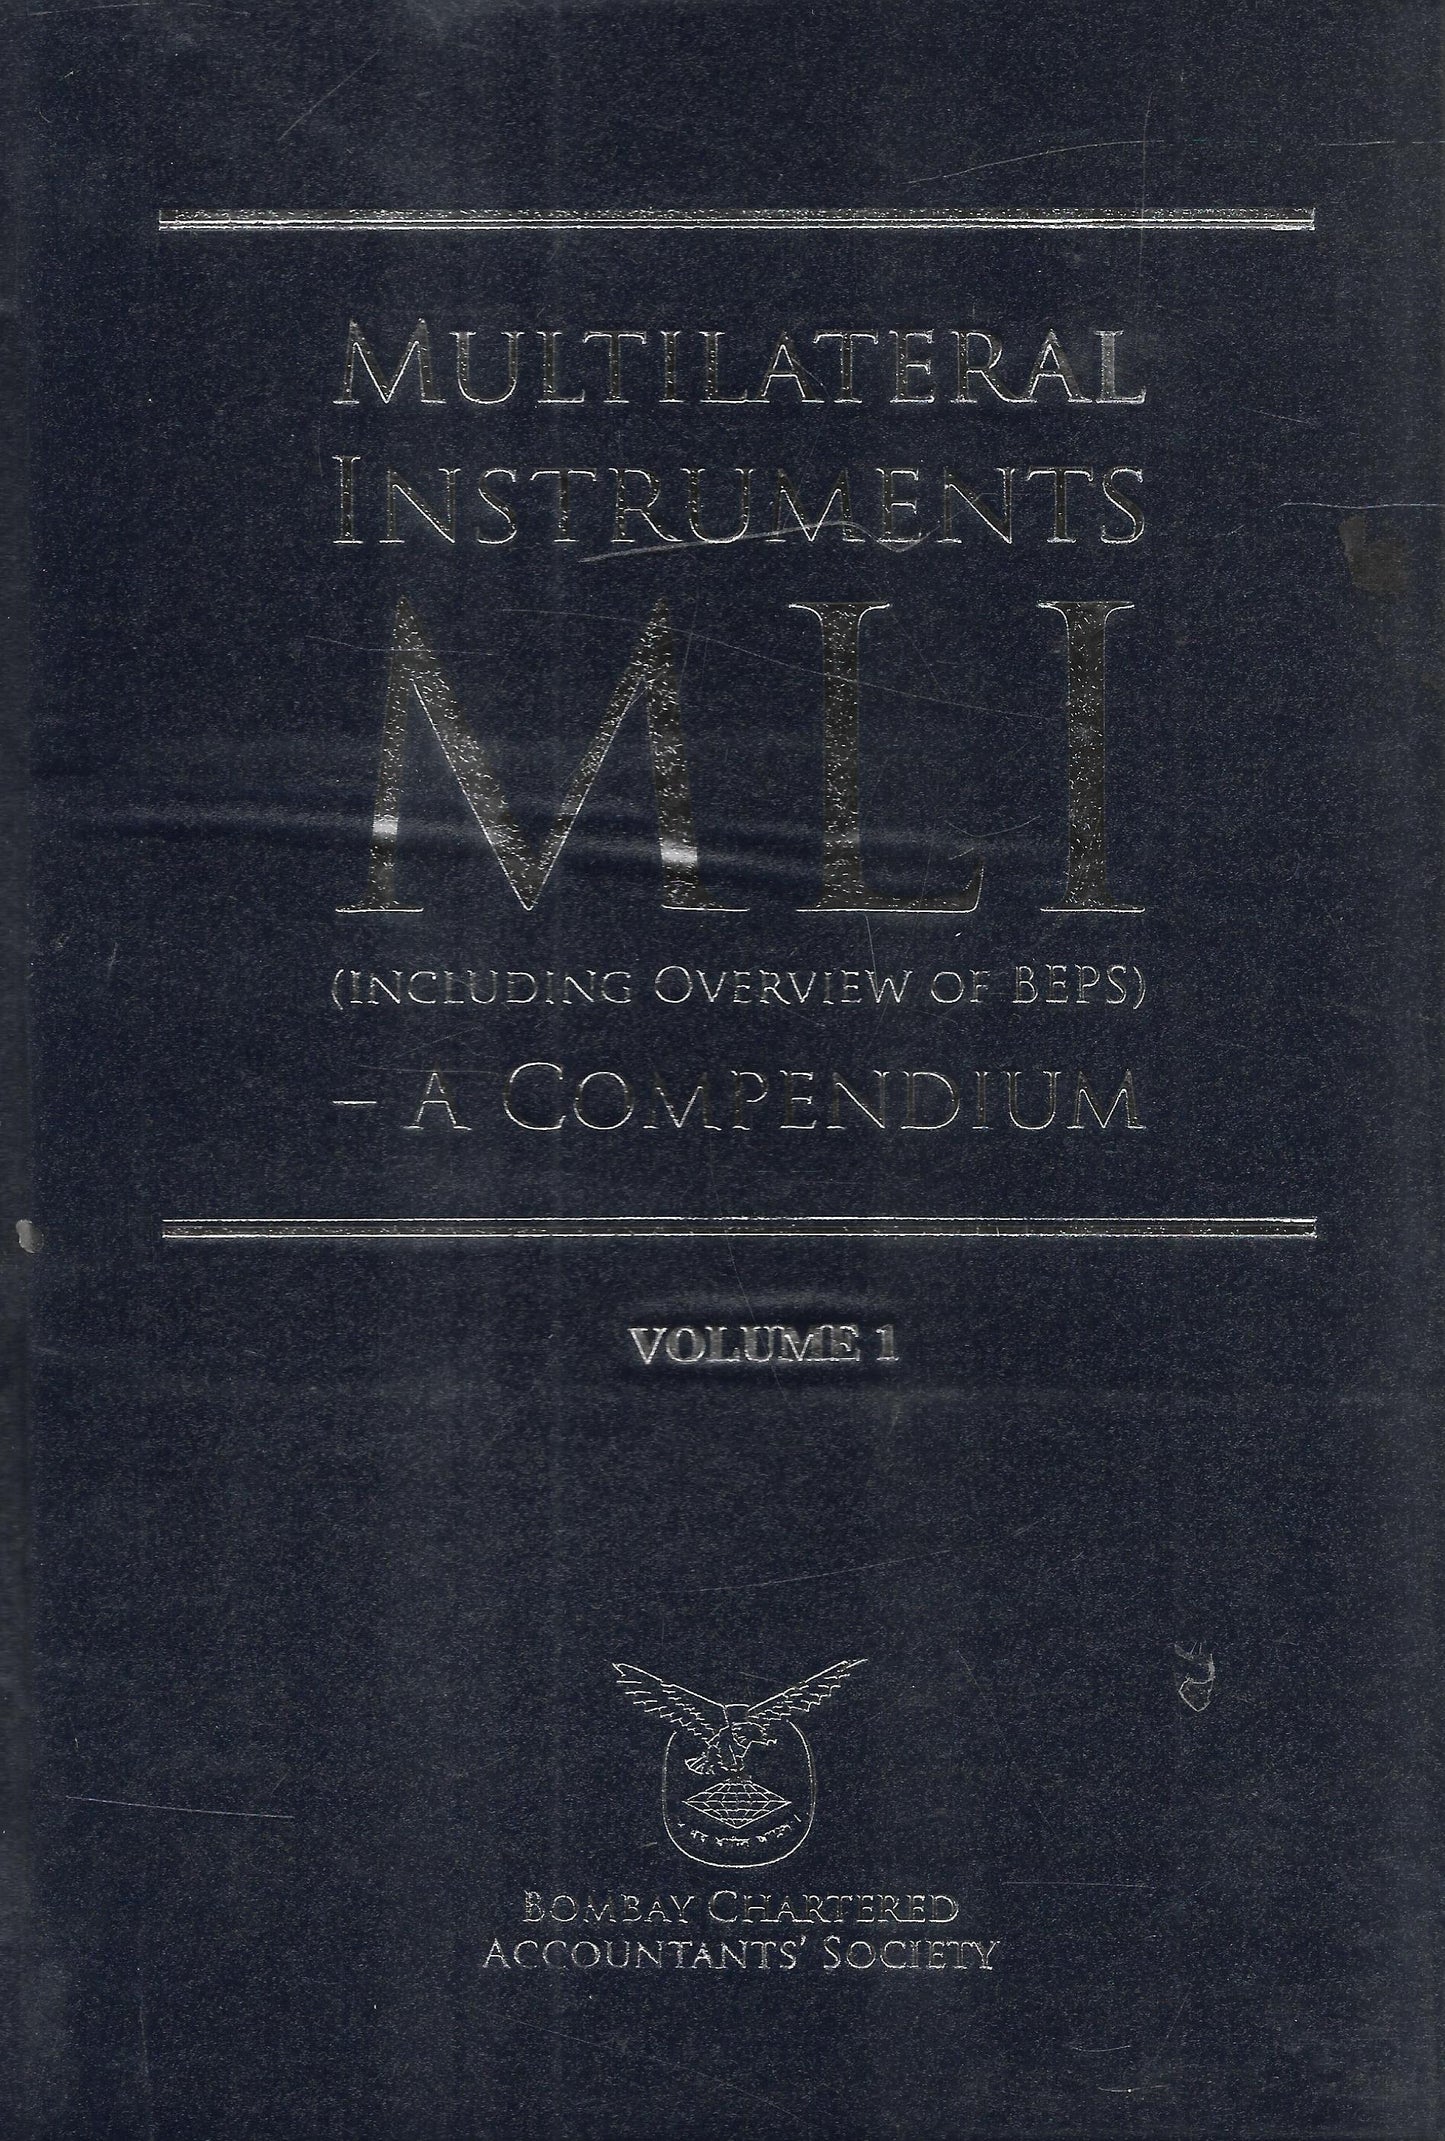 Multilateral Instruments [MLI] (including Overview of BEPS) – A Compendium - M&J Services